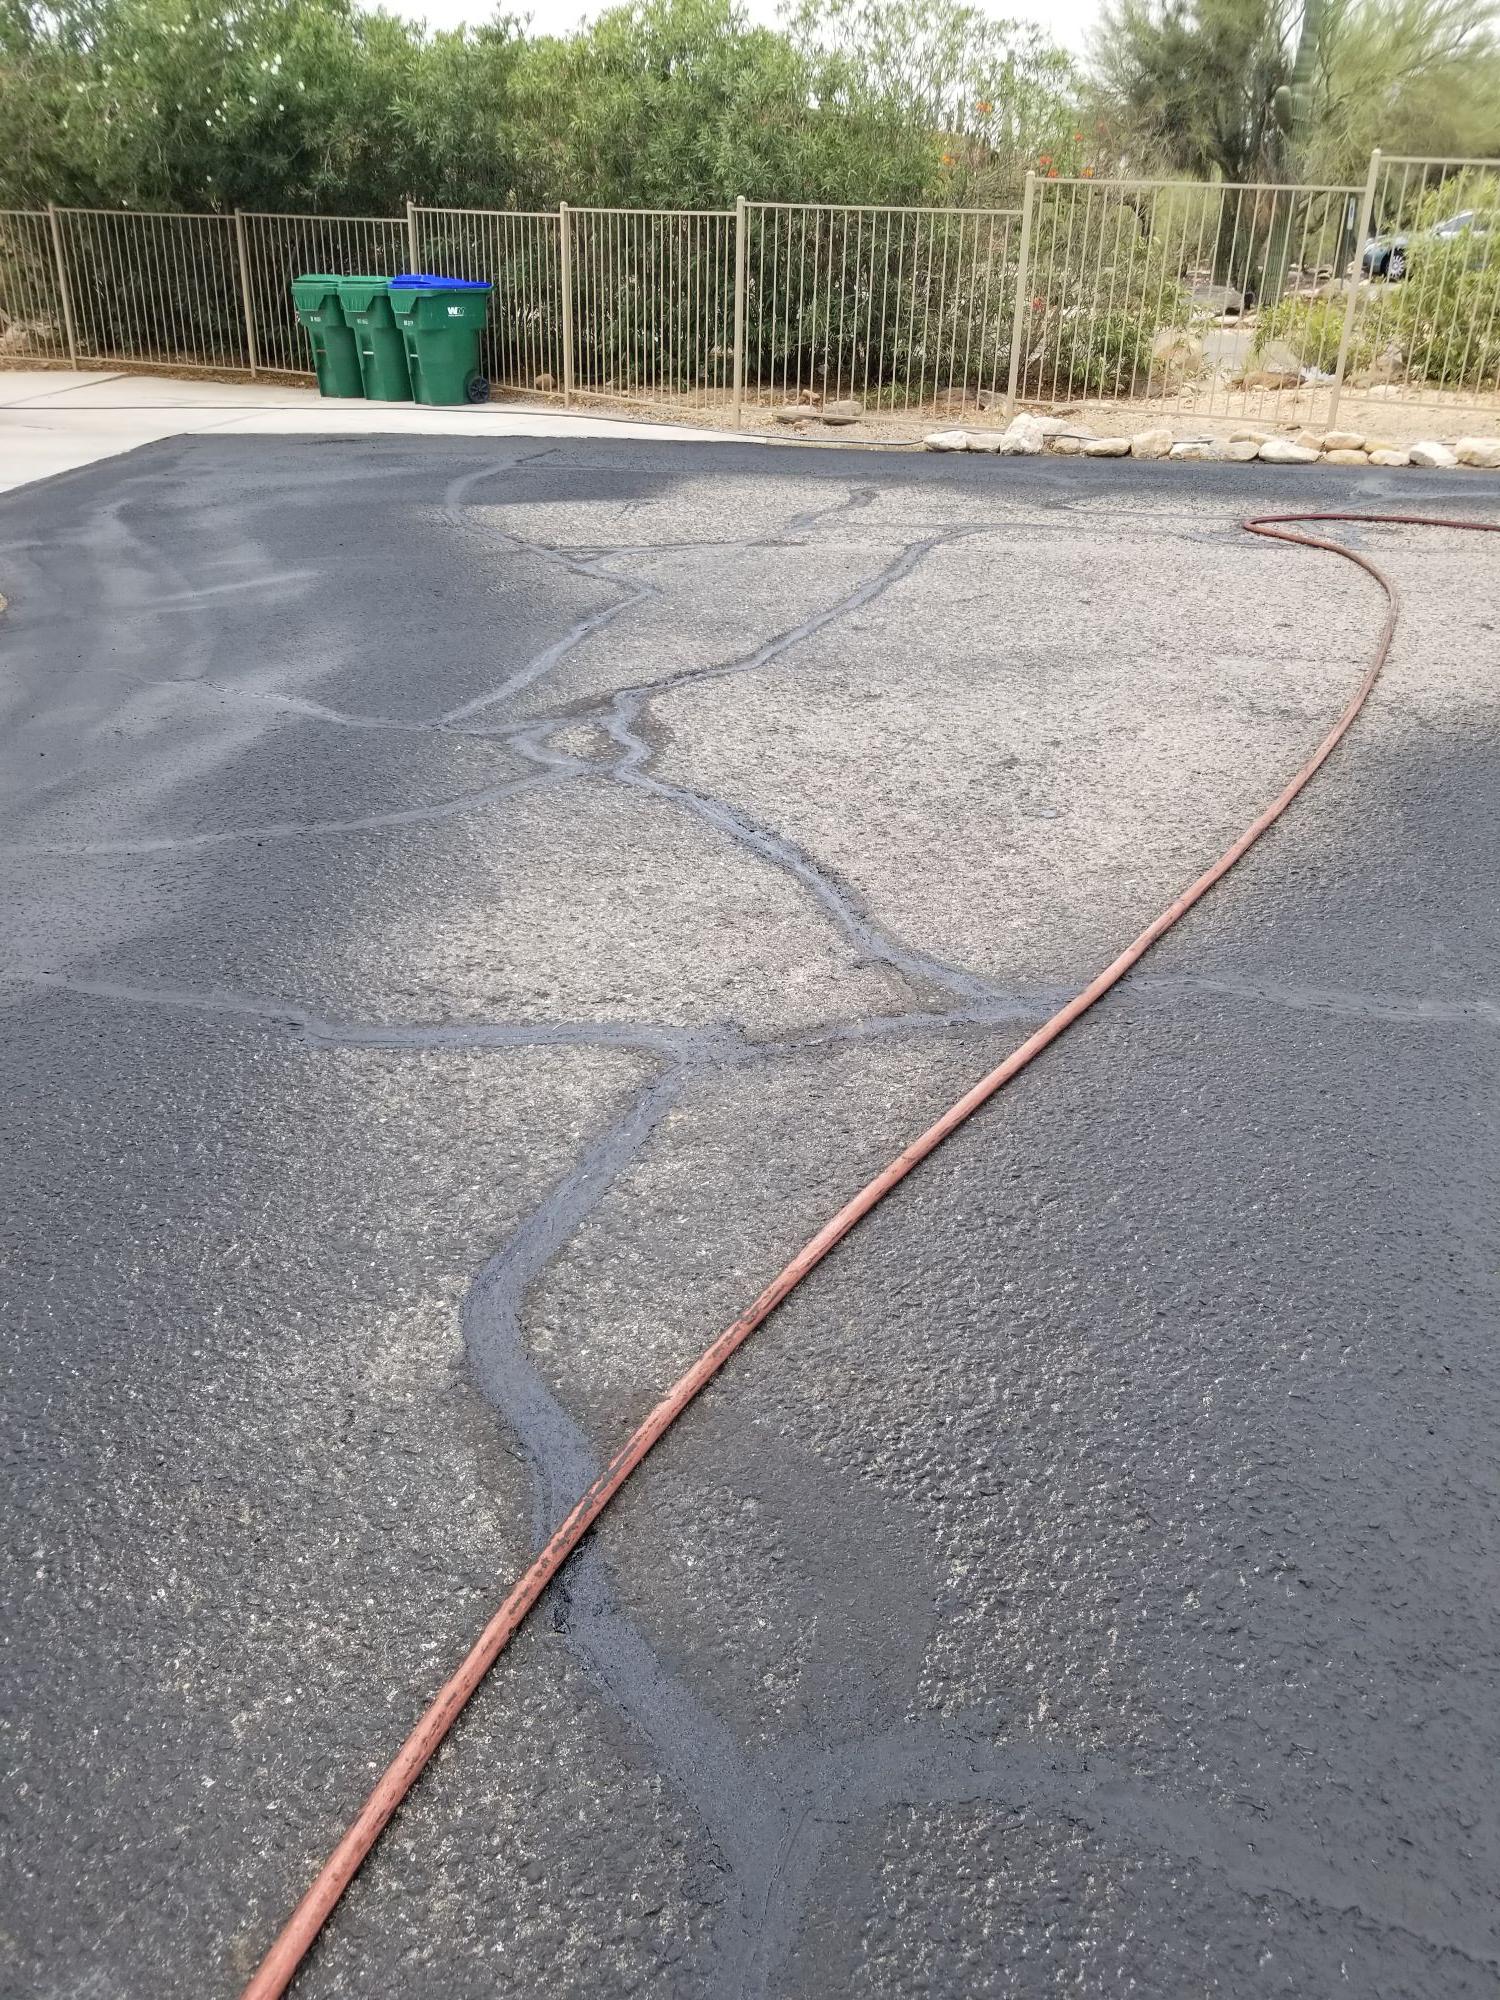 Maintain safety and organization in your parking area with Pro Asphalt & Sealcoating, LLC's Parking Lot Line Striping services in Tucson, AZ. Our meticulous line striping enhances visibility and optimizes parking space utilization, providing an efficient and orderly parking experience.